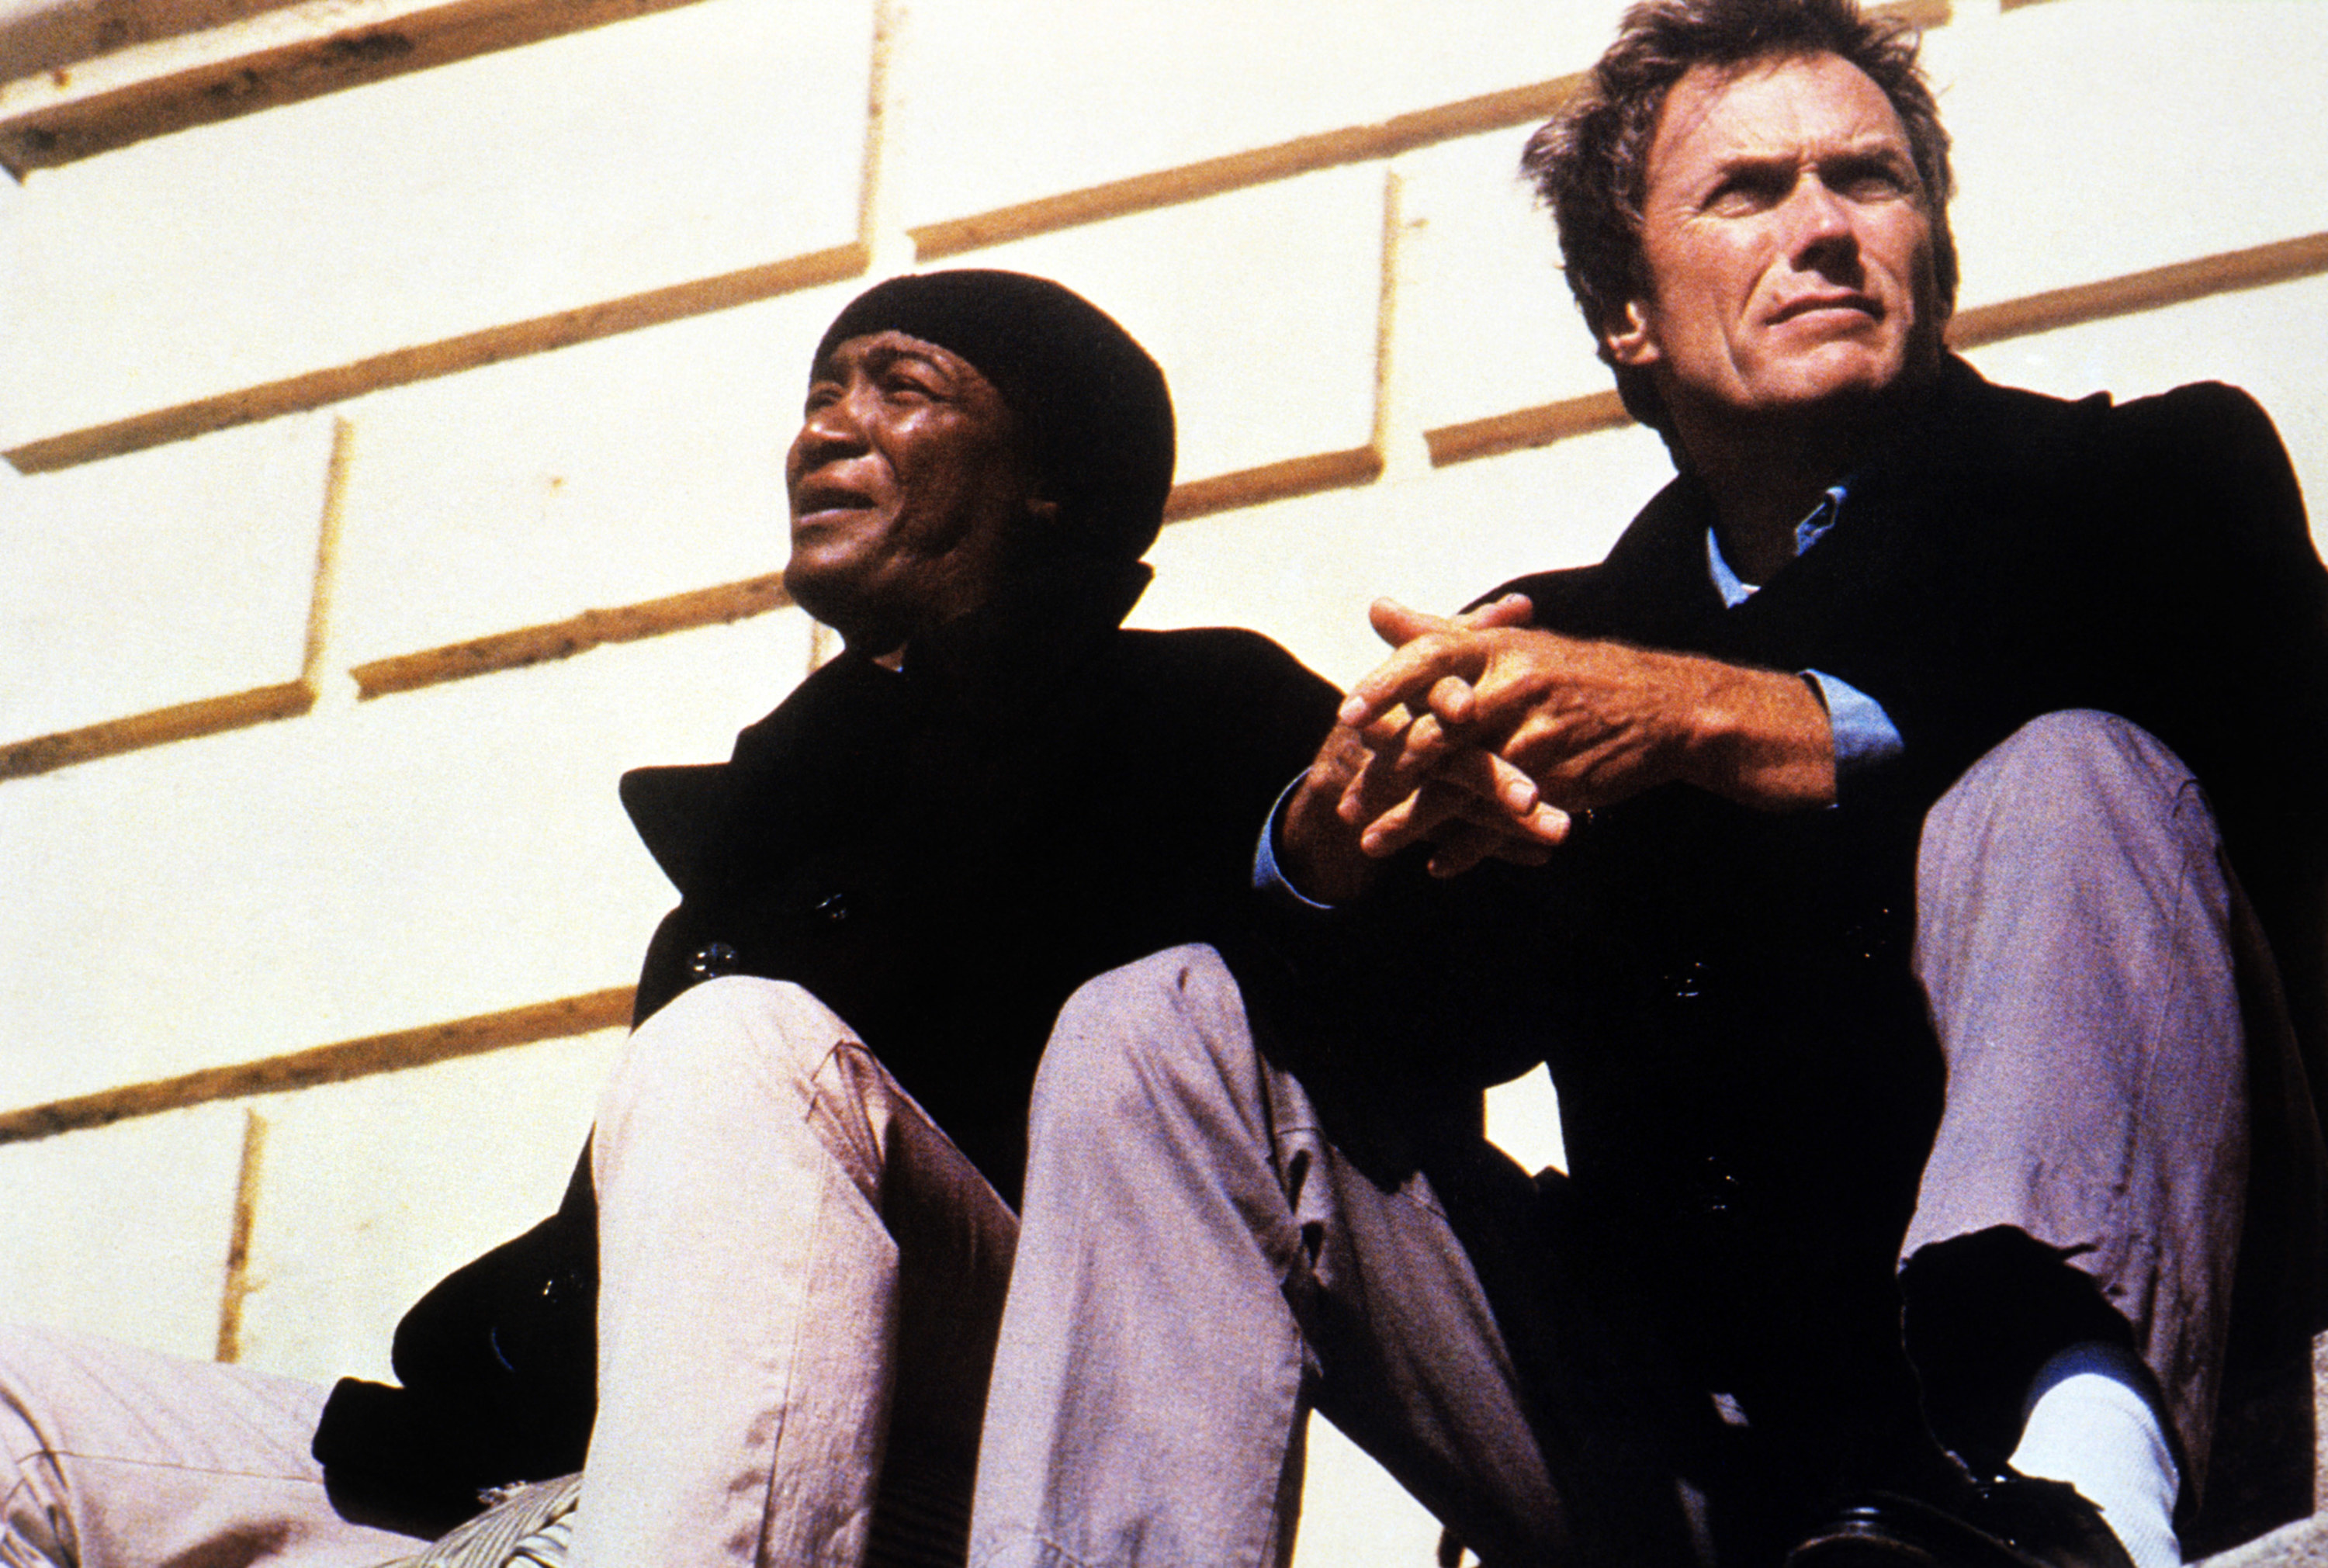 Paul Benjamin and Clint Eastwood sit outside a building